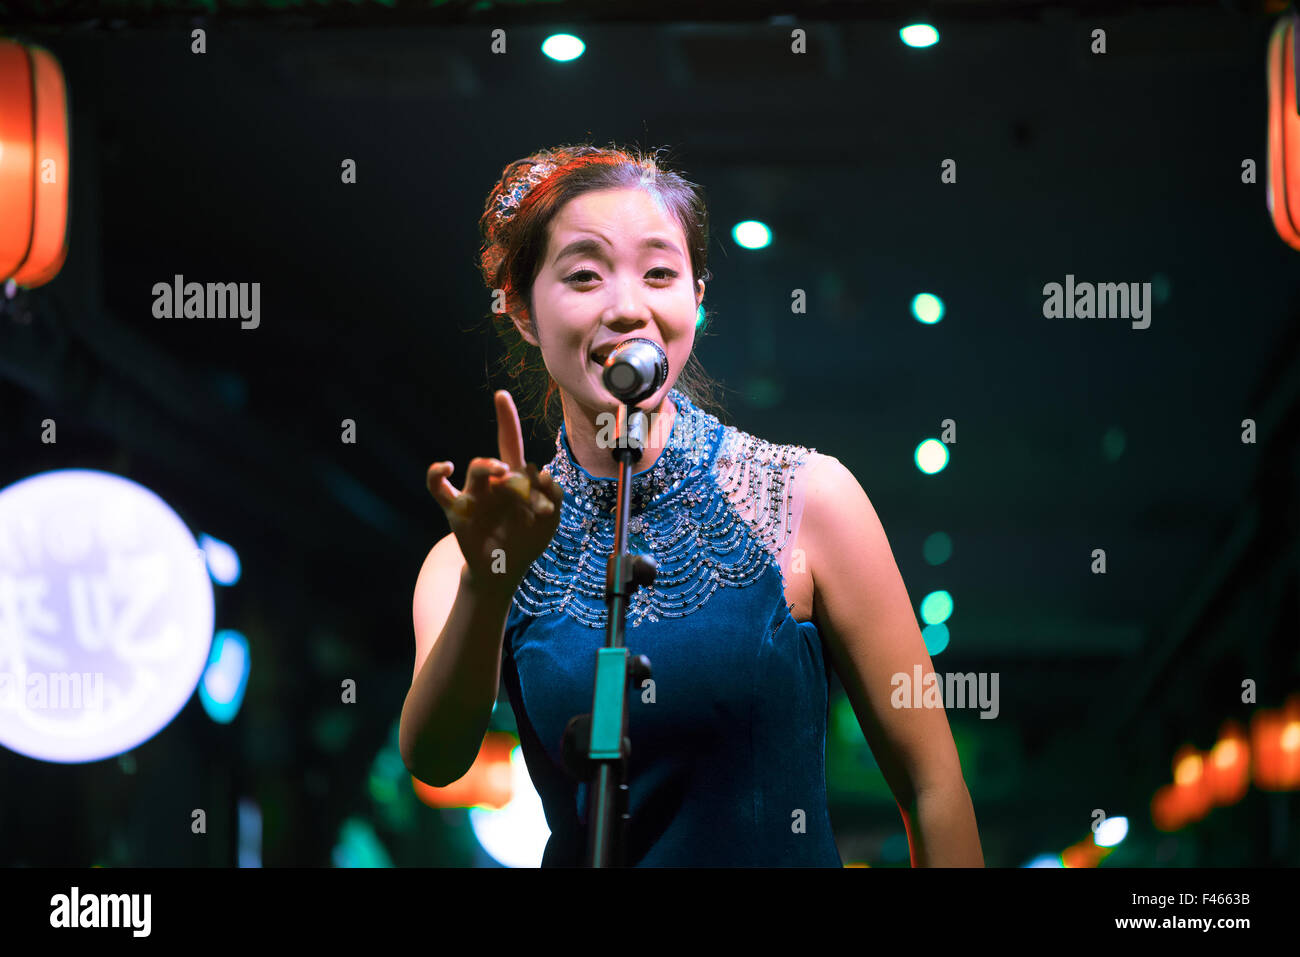 Chengdu, Sichuan Province, China - September 18, 2015: Chinese female artist sings traditional chinese song on stage Stock Photo